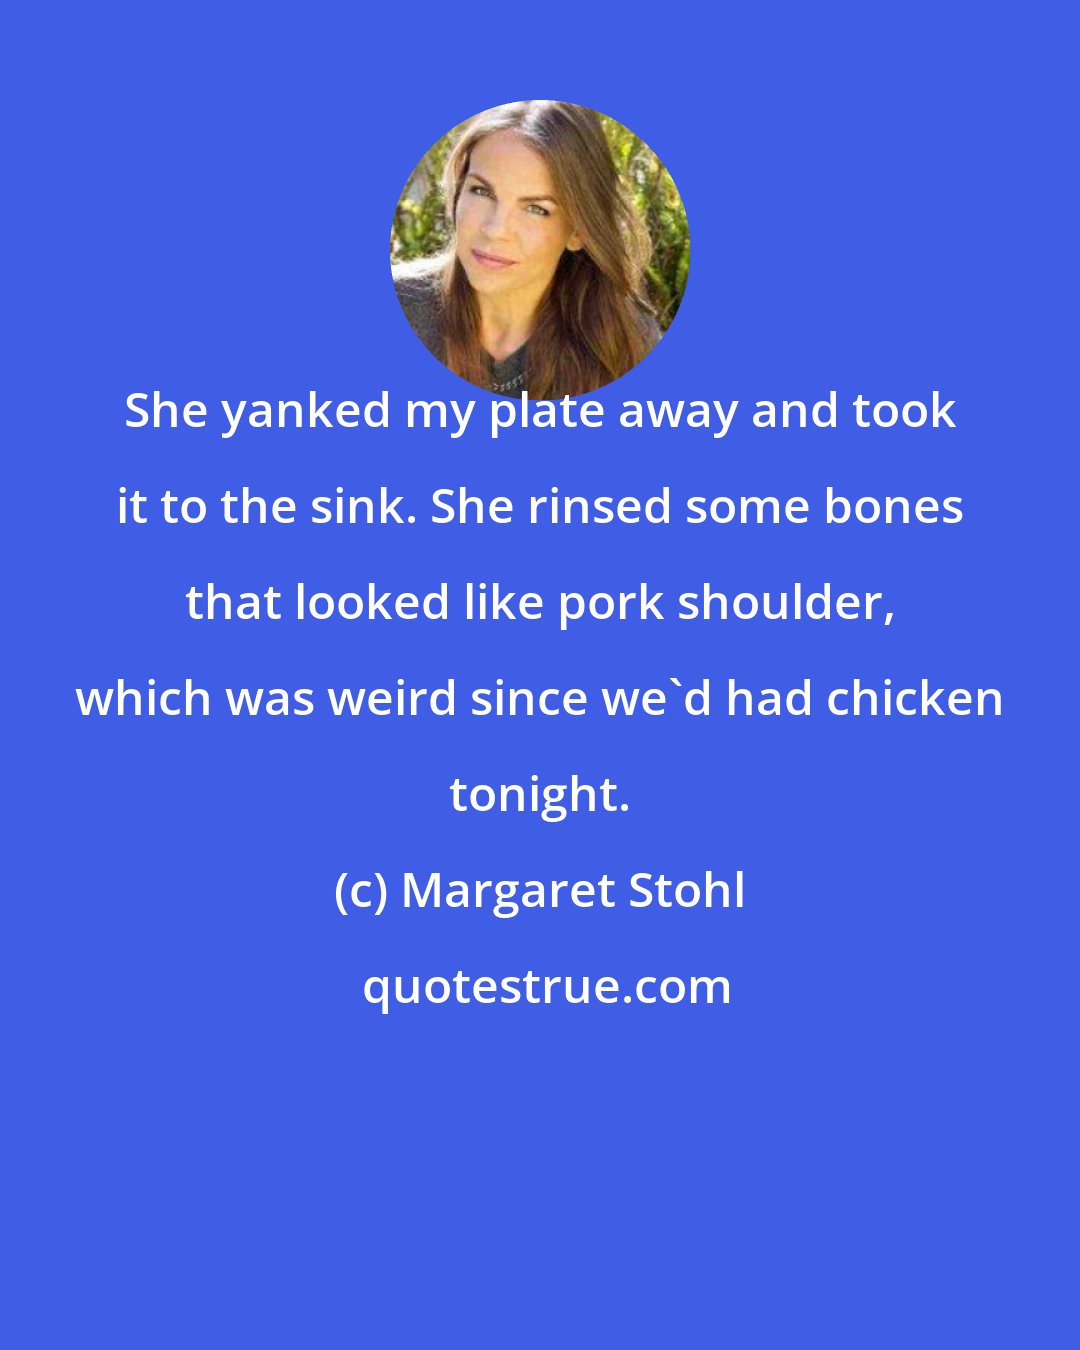 Margaret Stohl: She yanked my plate away and took it to the sink. She rinsed some bones that looked like pork shoulder, which was weird since we'd had chicken tonight.